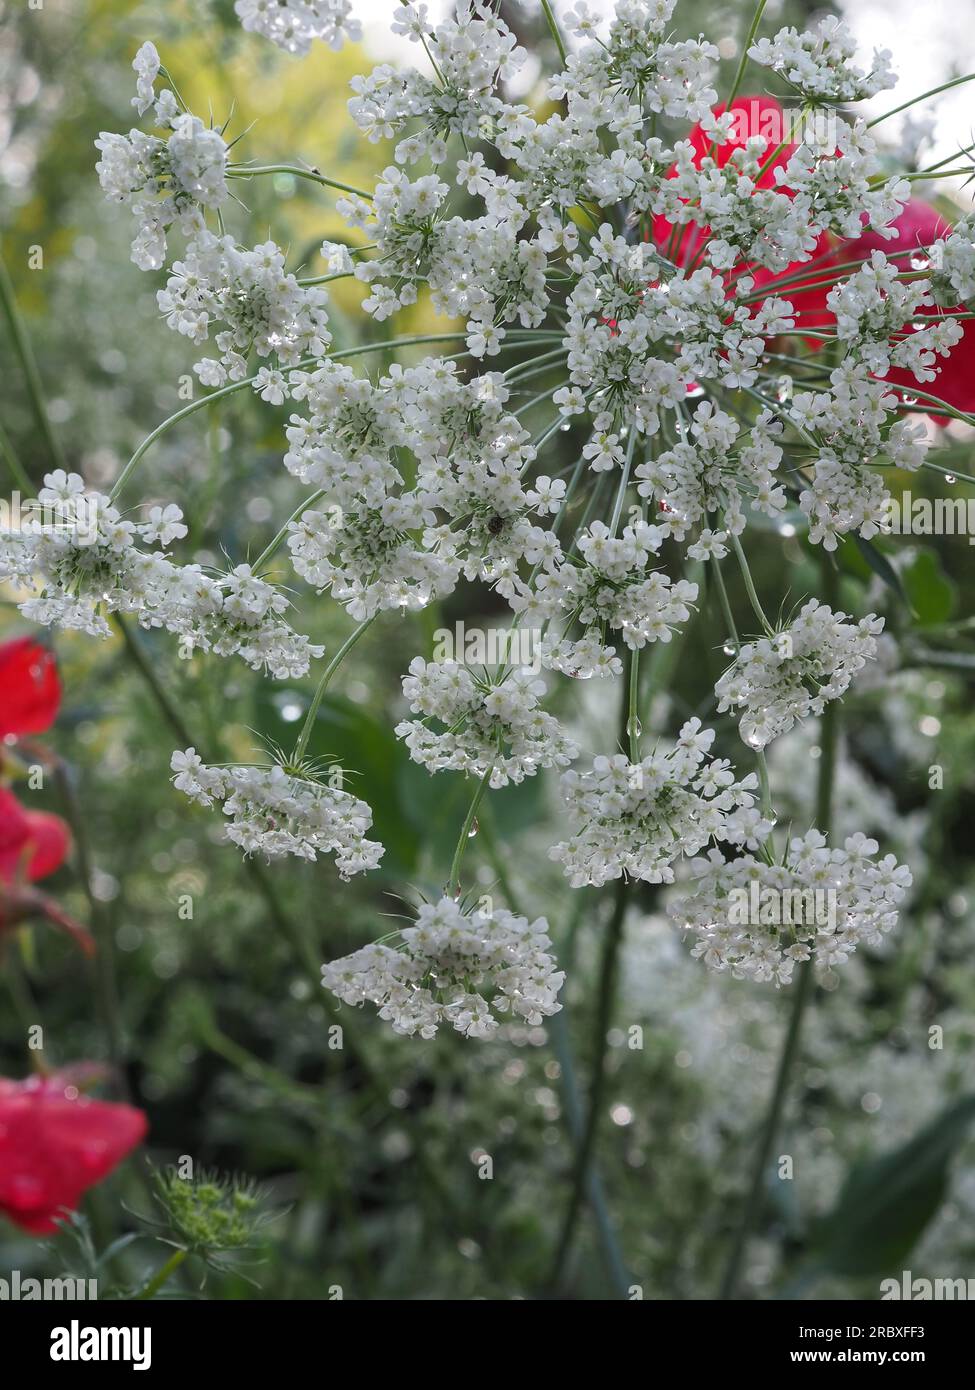 Dainty white Ammi majus (Bishop's flower) in close up in a cut flower garden showing the individual florets of the umbel with dewdrops or rain on them Stock Photo